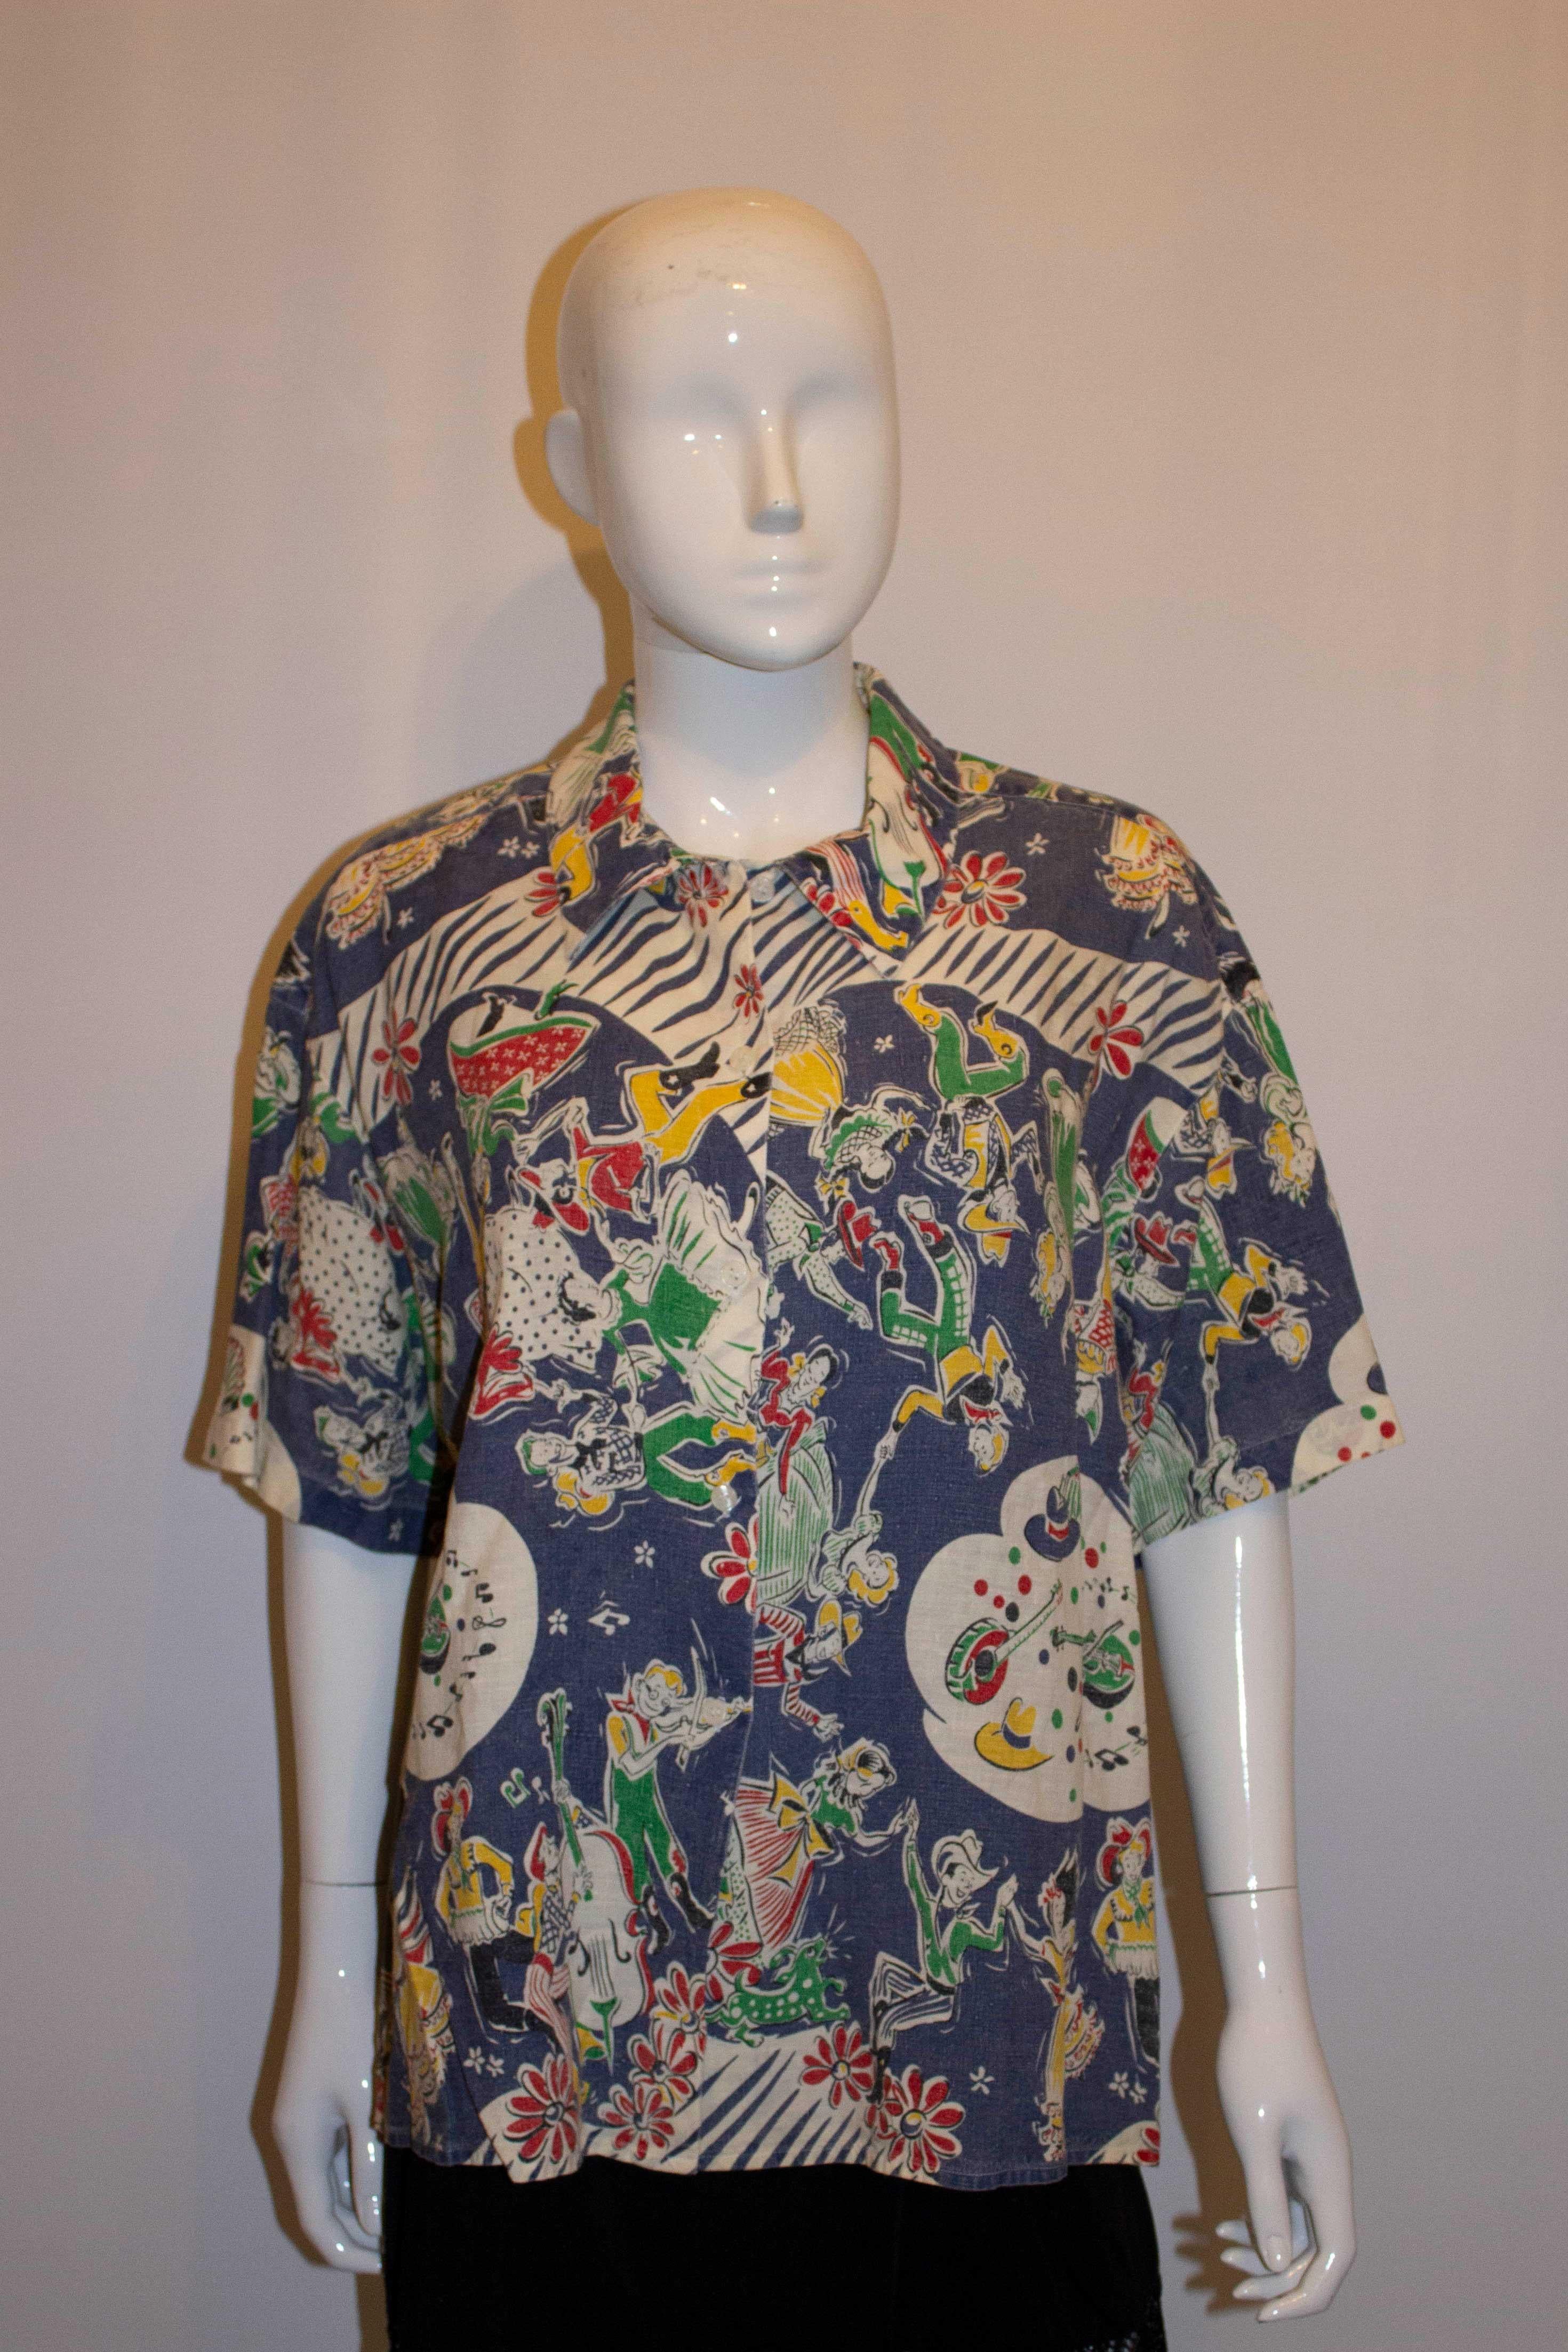 Vintage Donna Karan New York Printed Linen Shirt In Good Condition For Sale In London, GB